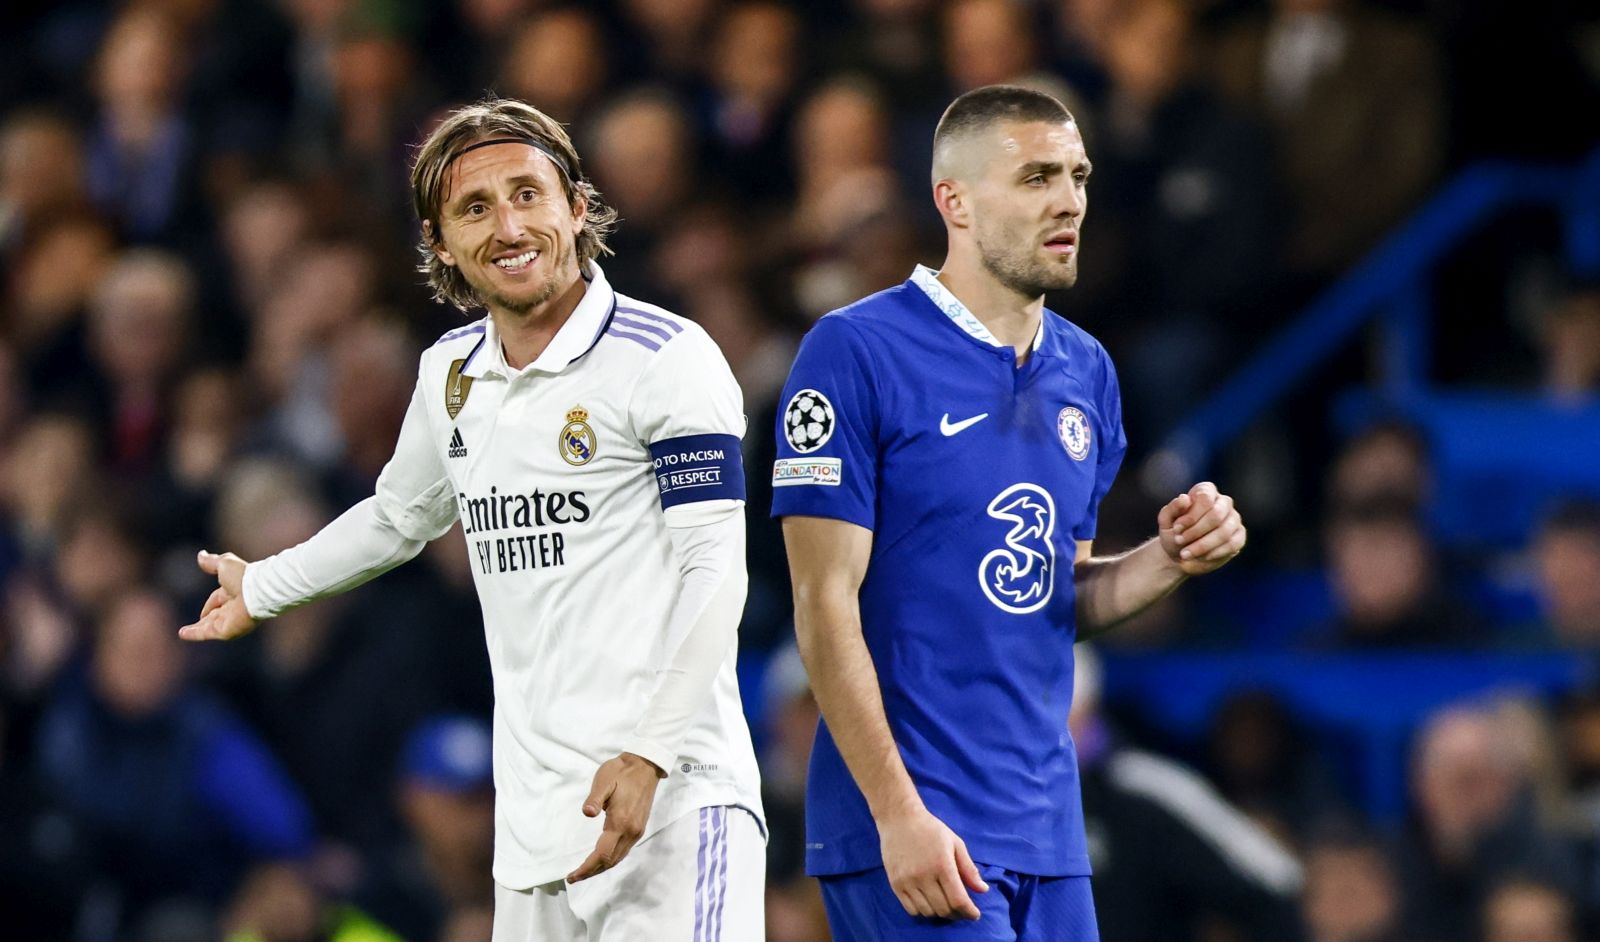 epa10579211 Luka Modric of Real Madrid (L) reacts next to Mateo Kovacic of Chelsea during the UEFA Champions League quarter final, 2nd leg match between Chelsea and Real Madrid in London, Britain, 18 April 2023.  EPA/TOLGA AKMEN